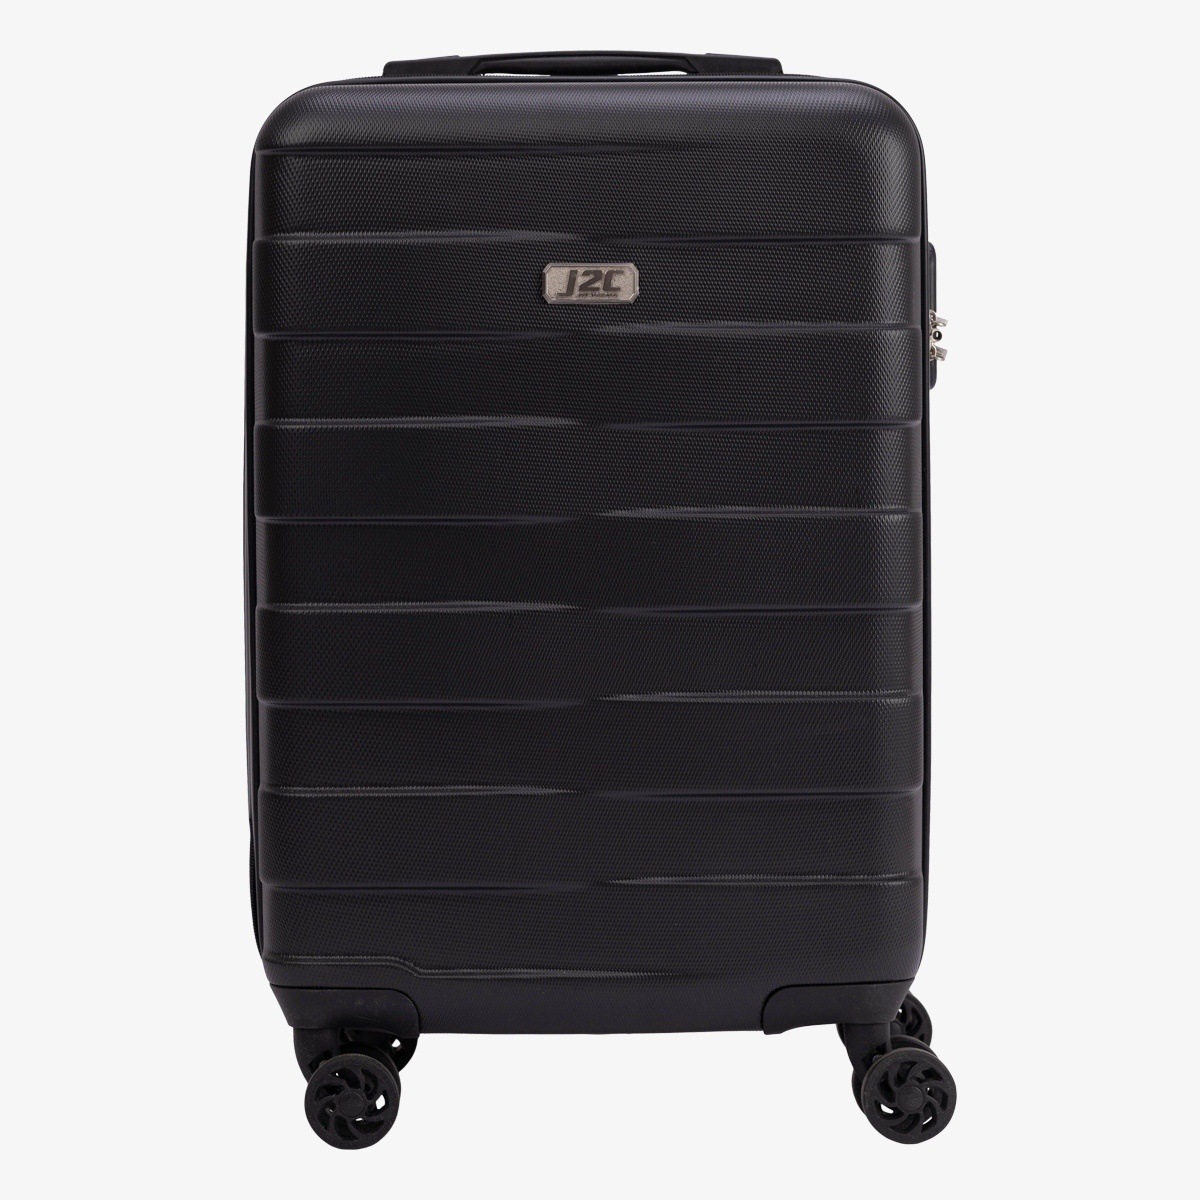 J2C 3 in 1 HARD SUITCASE 24 INCH 